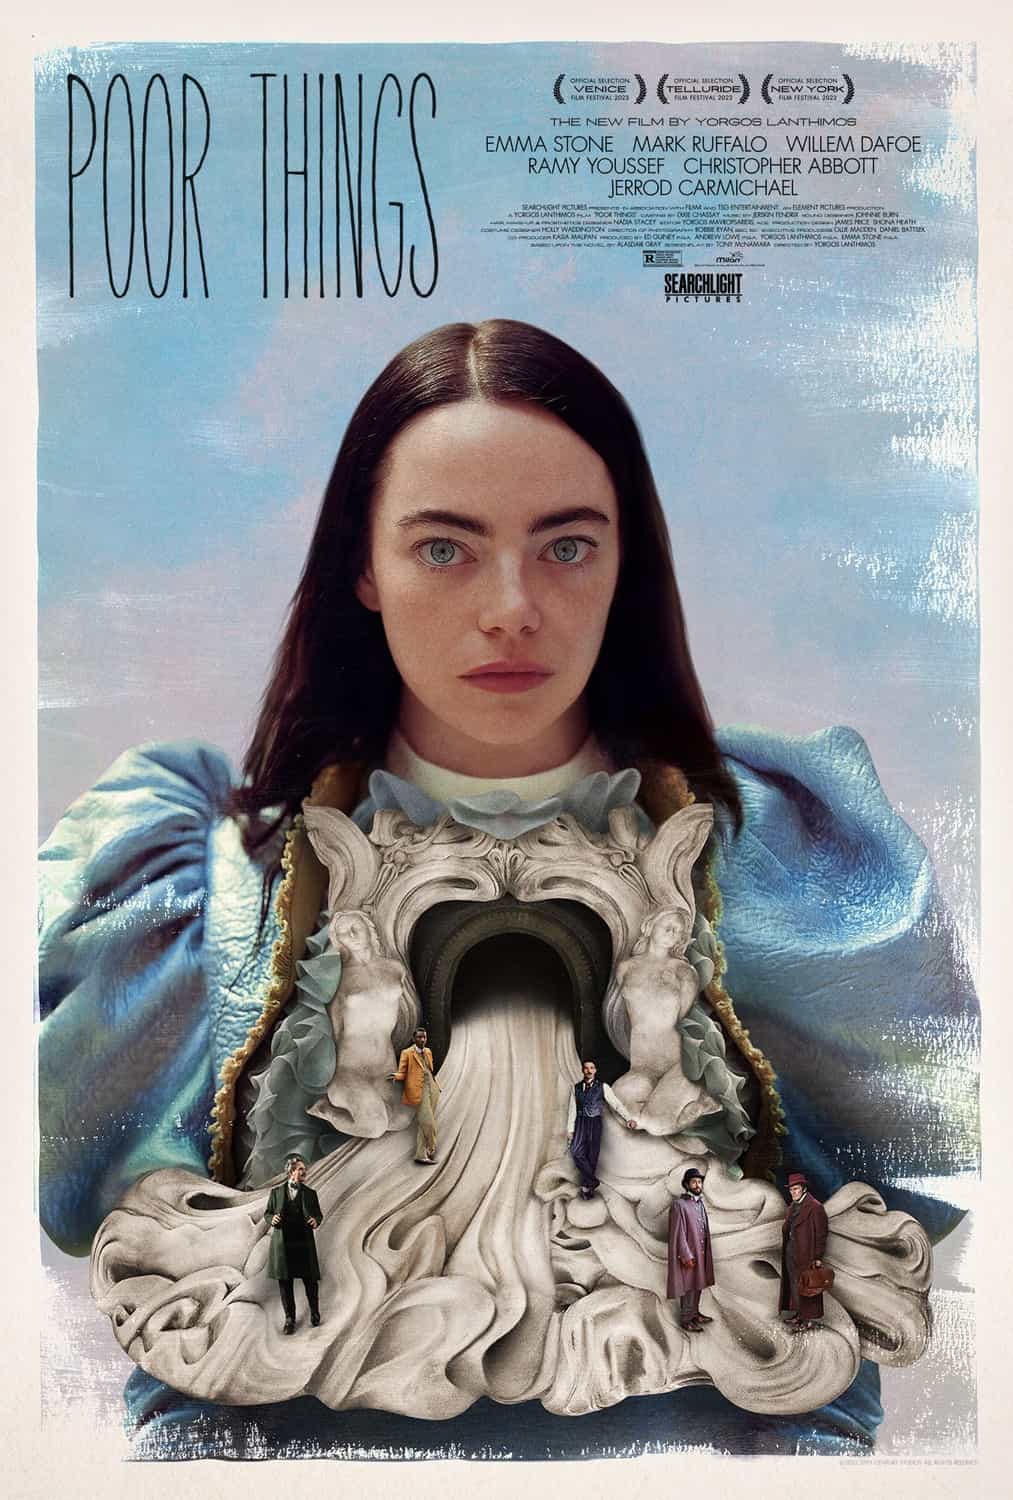 New poster has been released for Poor Things which stars Emma Stone and Mark Ruffalo - movie UK release date 12th January 2024 #poorthings